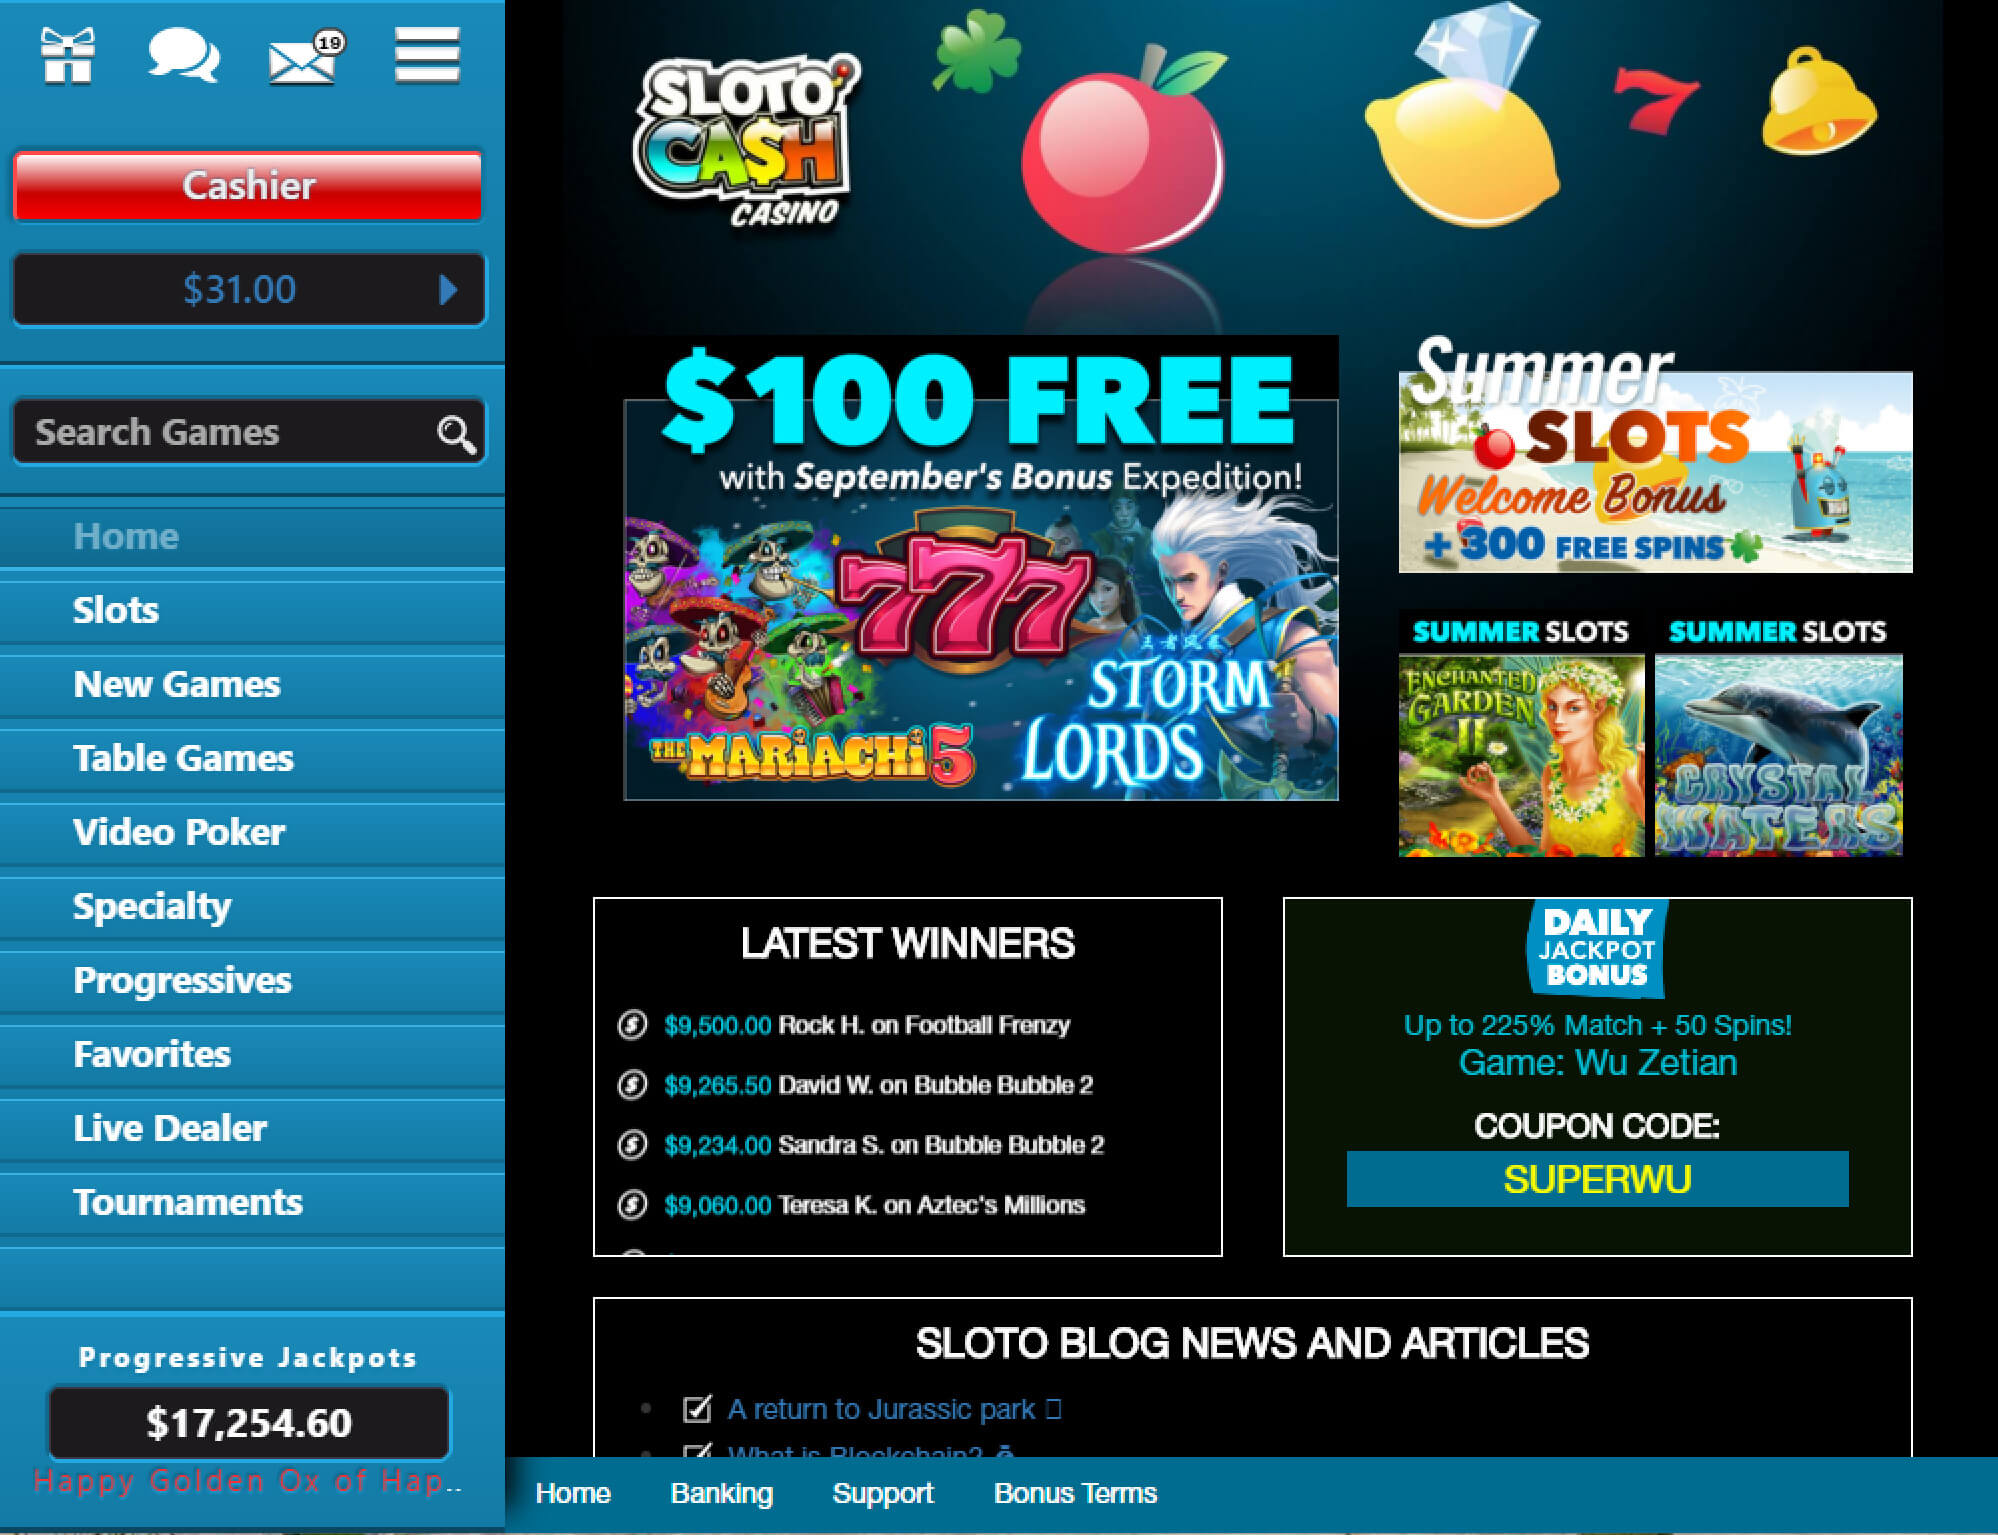 User Interface View of Online Sloto Cash Casino Downloadable Version